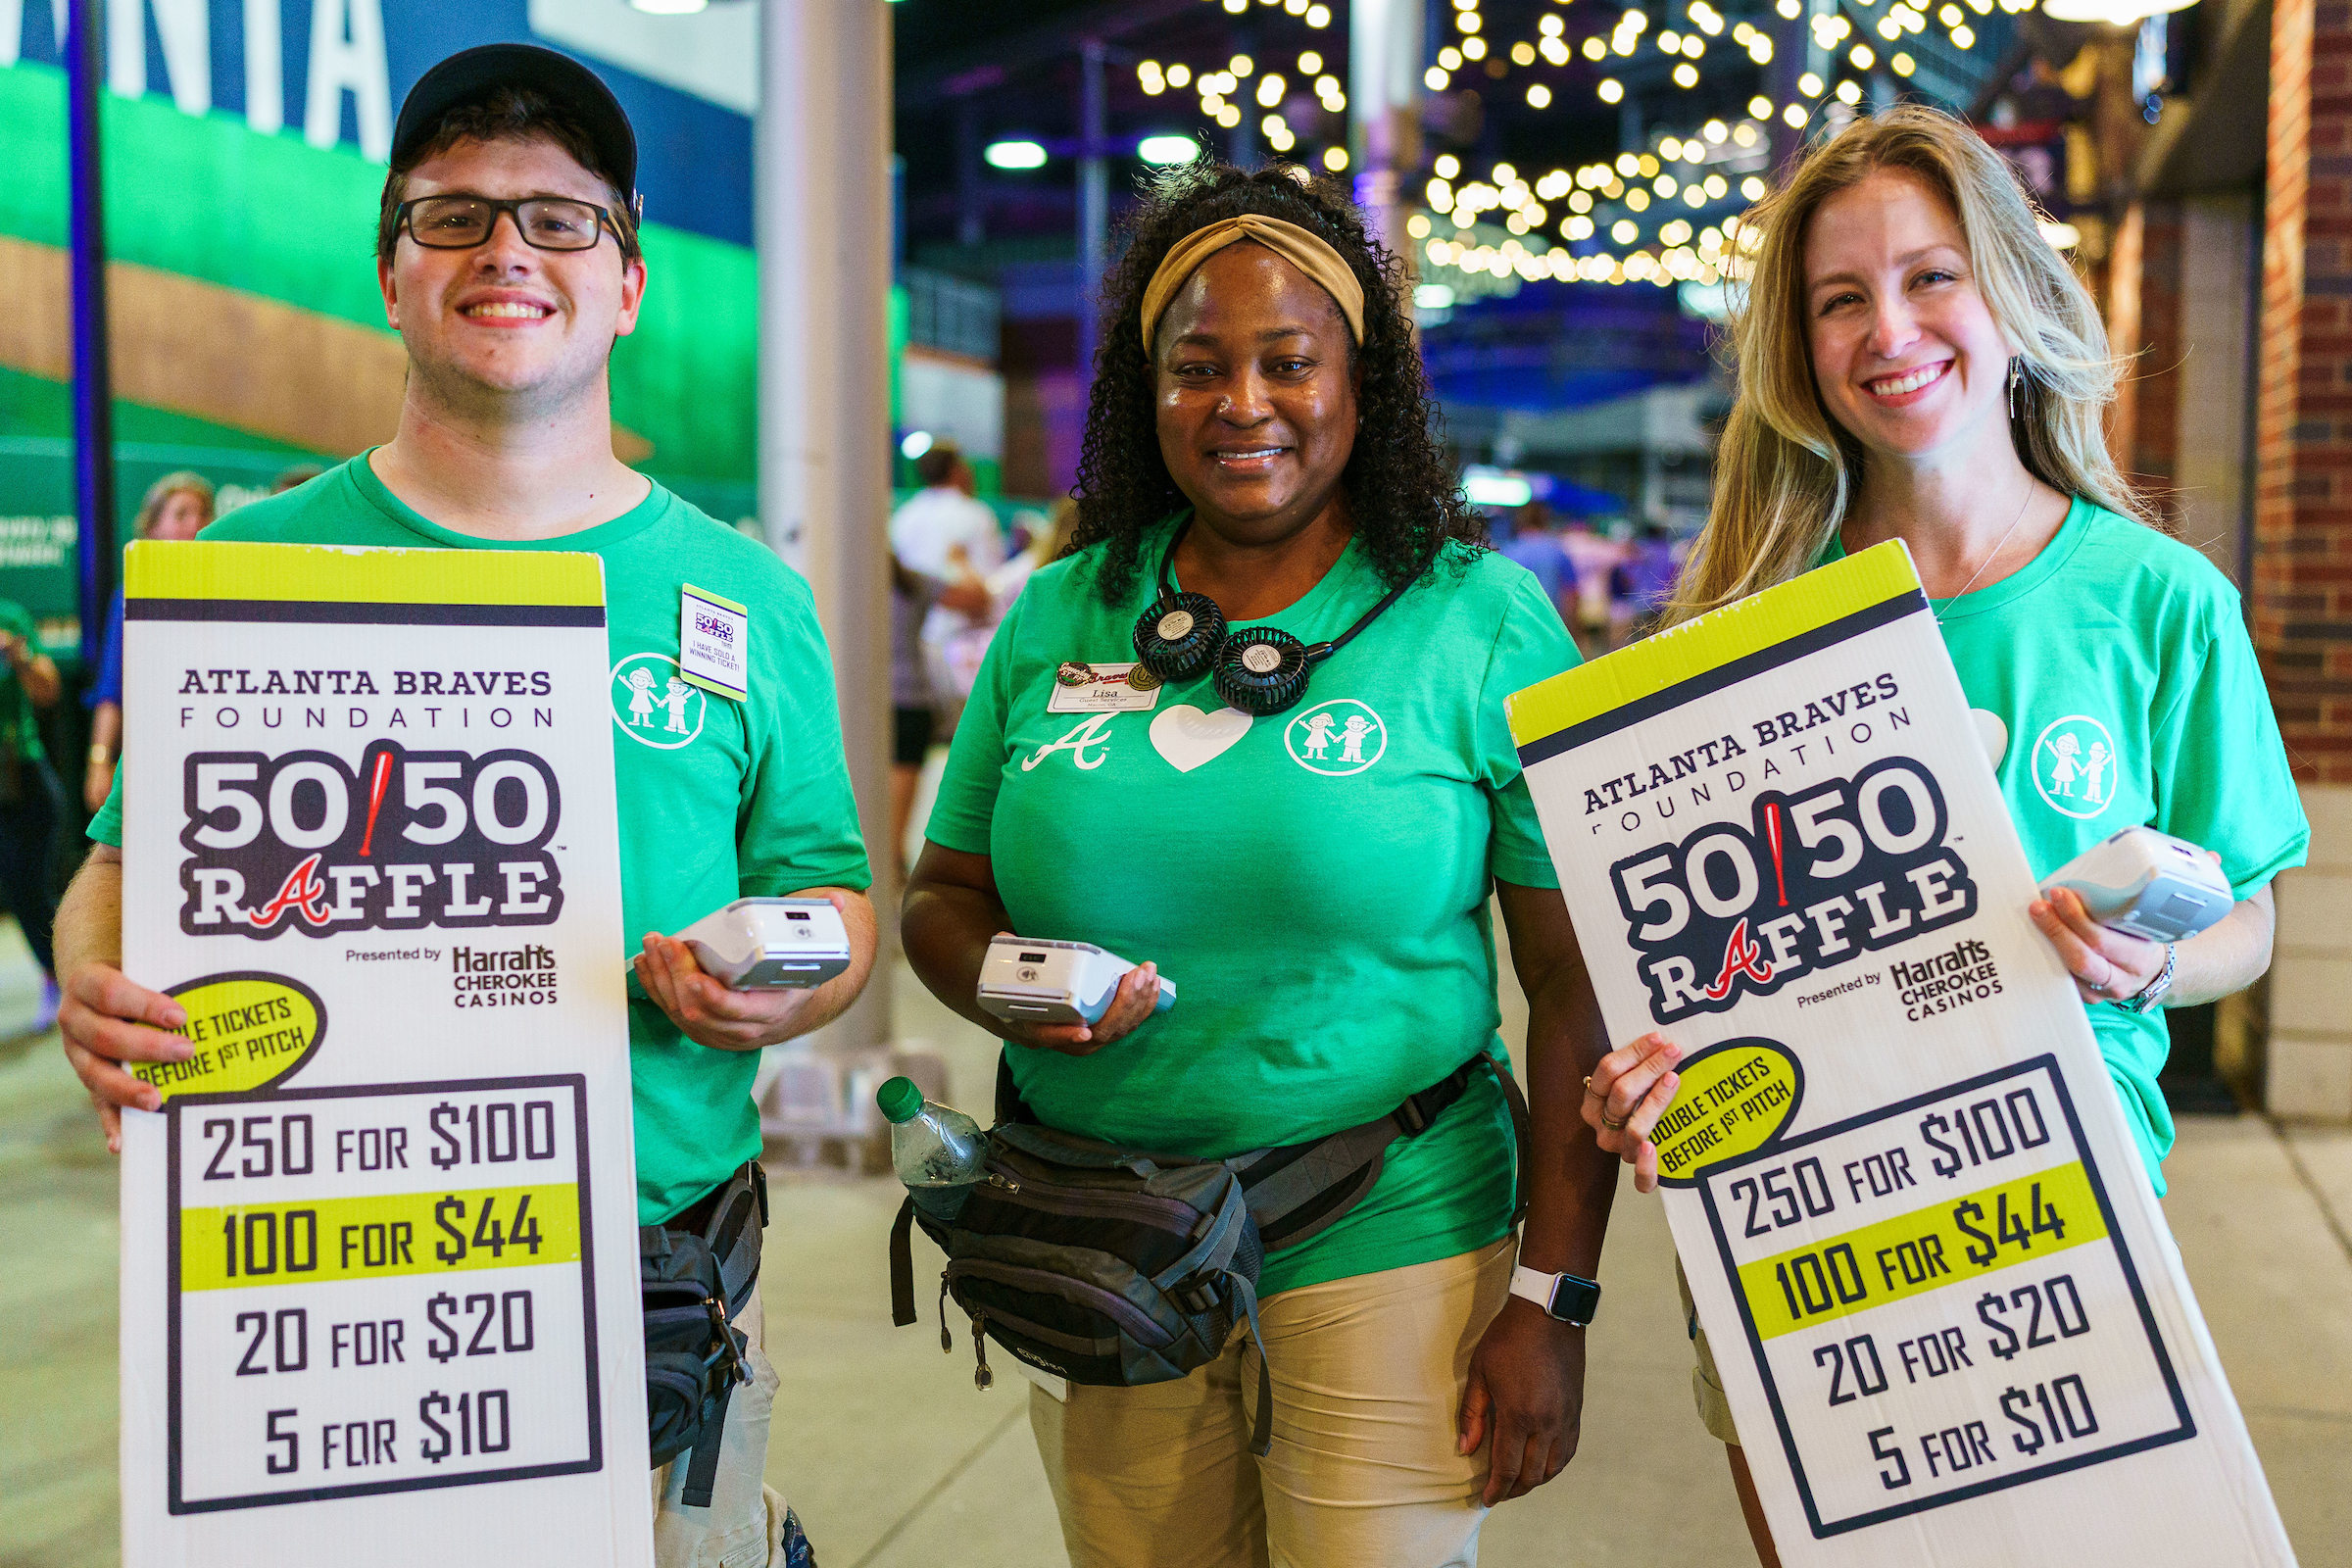 Atlanta Braves Foundation on X: The 50/50 Raffle rolling jackpot is almost  $30,000 with two days still left to enter! Purchase your raffle tickets  while in @TruistPark or @BatteryATL from any raffle